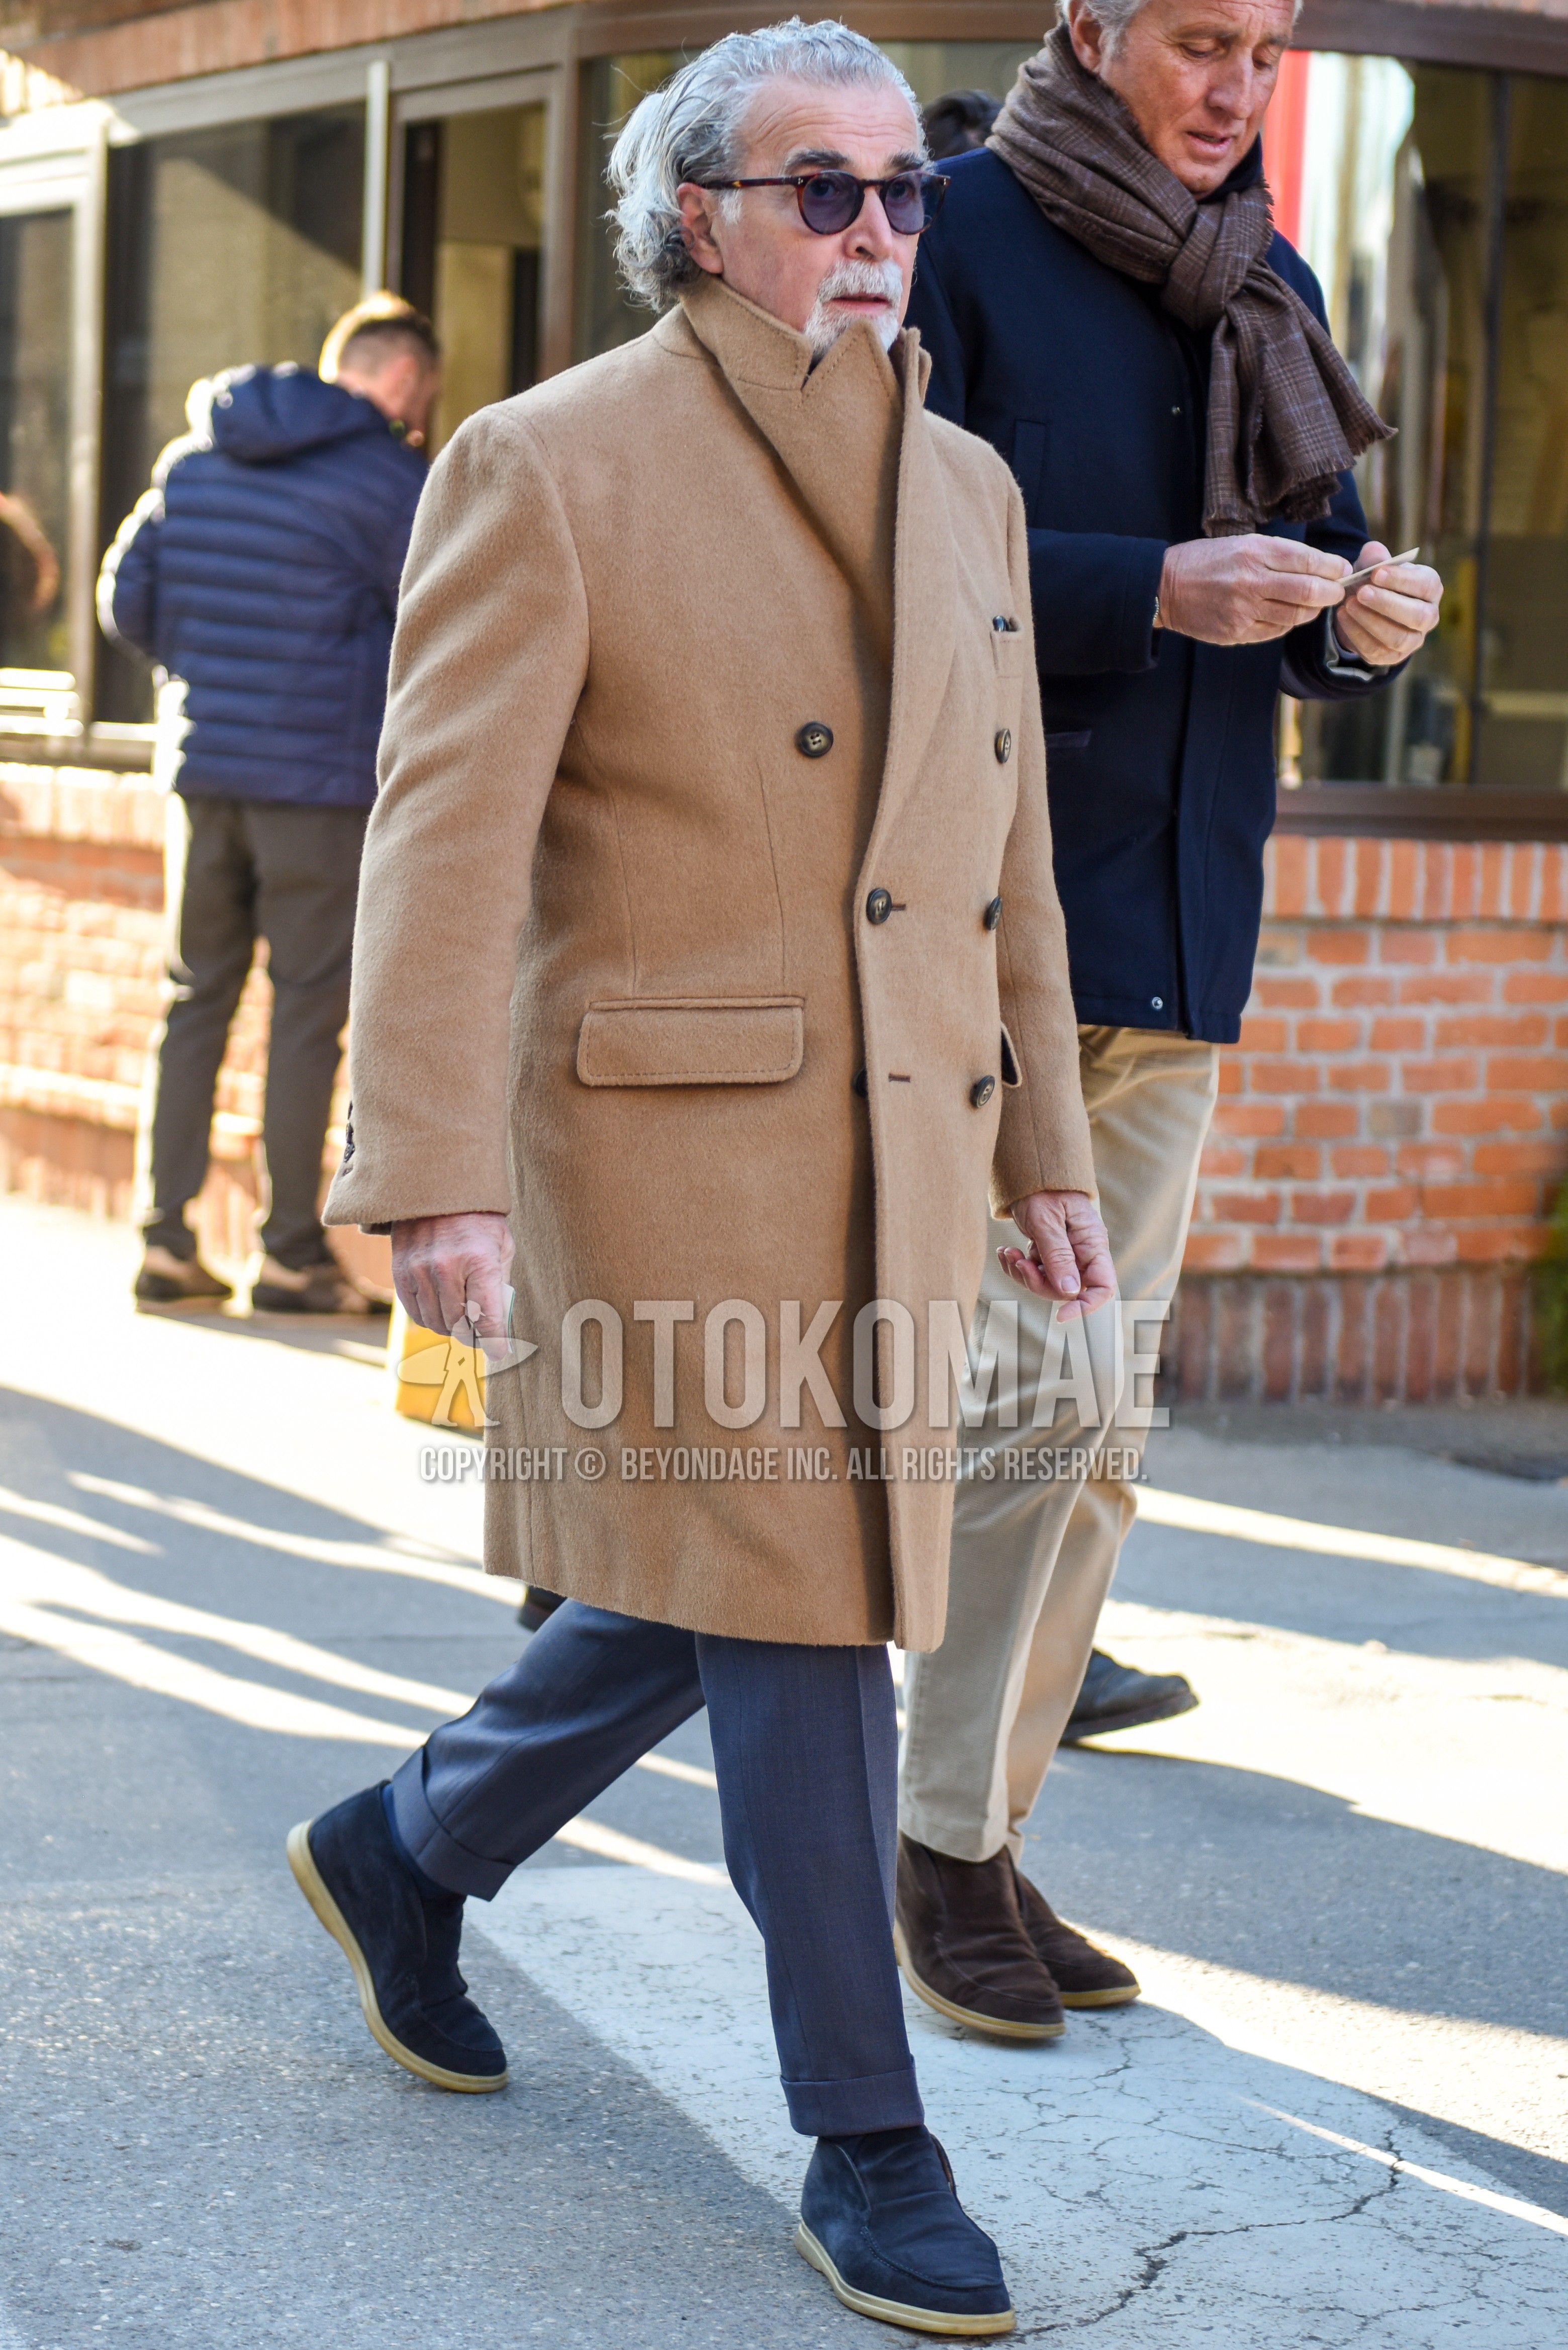 Men's autumn winter outfit with brown tortoiseshell sunglasses, beige plain chester coat, gray plain ankle pants, gray plain slacks, navy plain socks, navy high-cut sneakers.